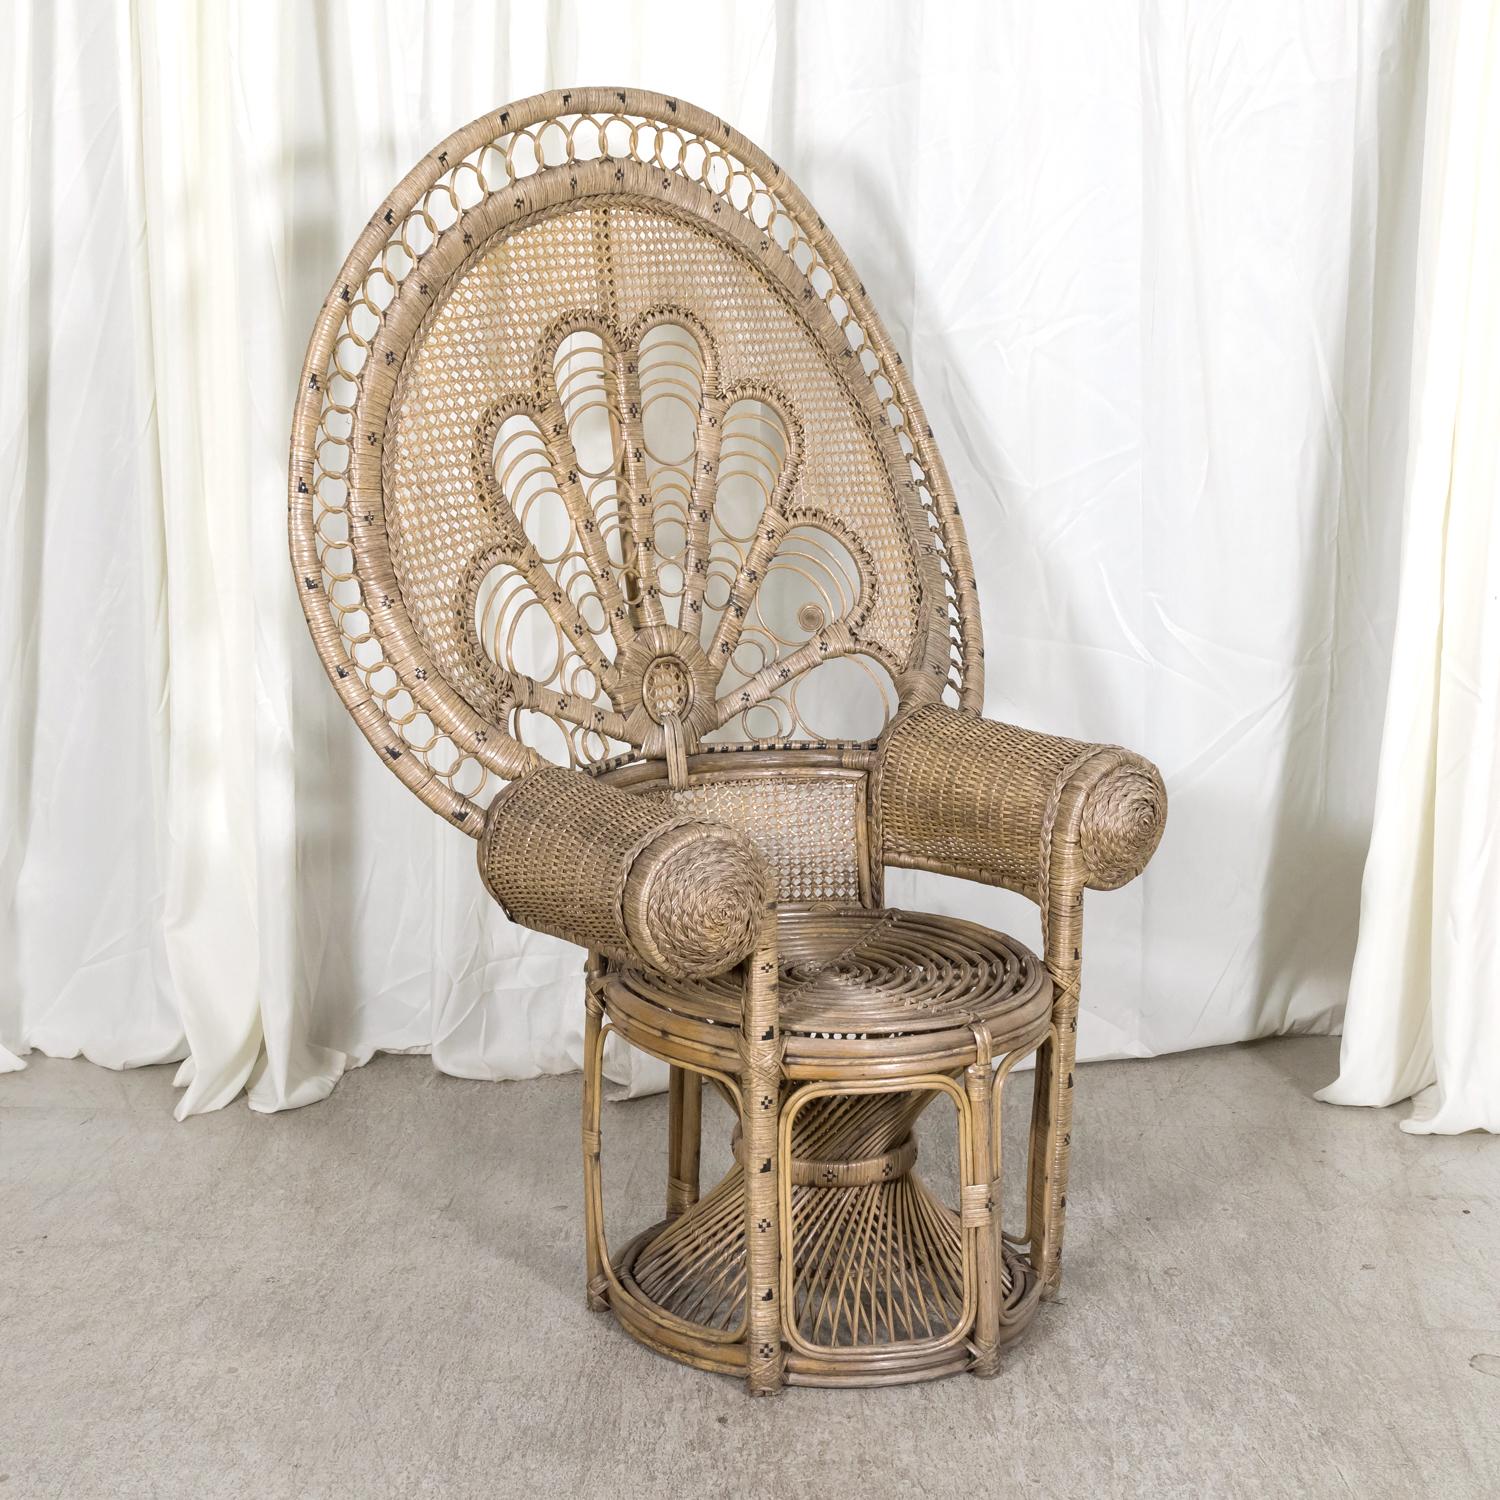 Rare 1930s French Wicker Rattan Emmanuelle Peacock Chair For Sale 6